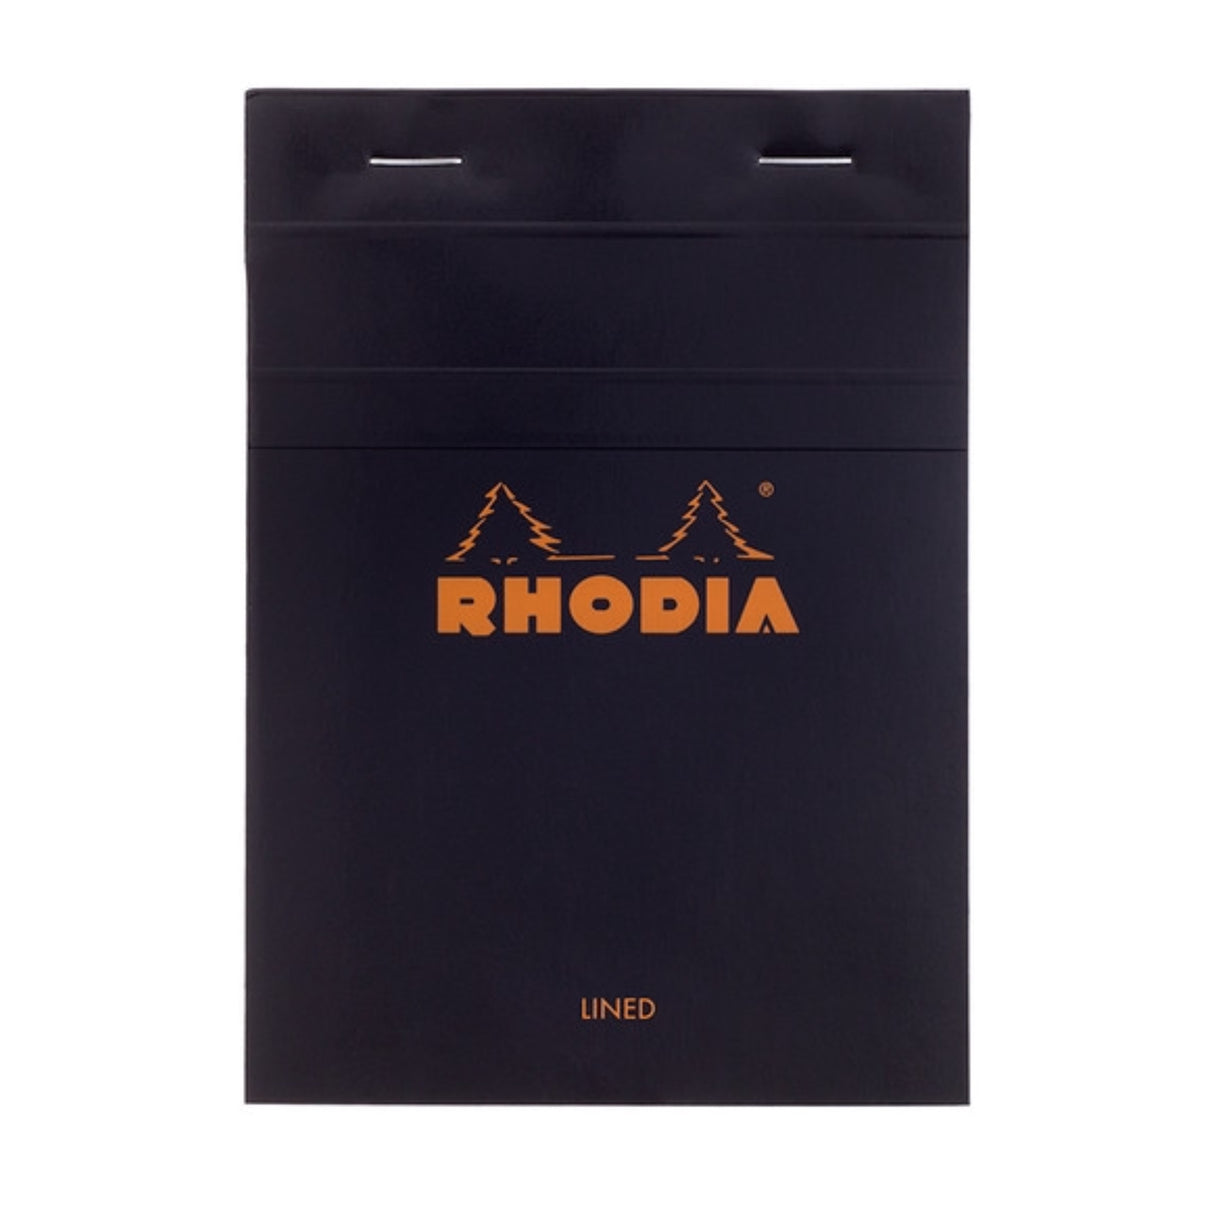 RHODIA BLACK LINED NOTEPAD 4.1 X 5.8in (4 X 6)